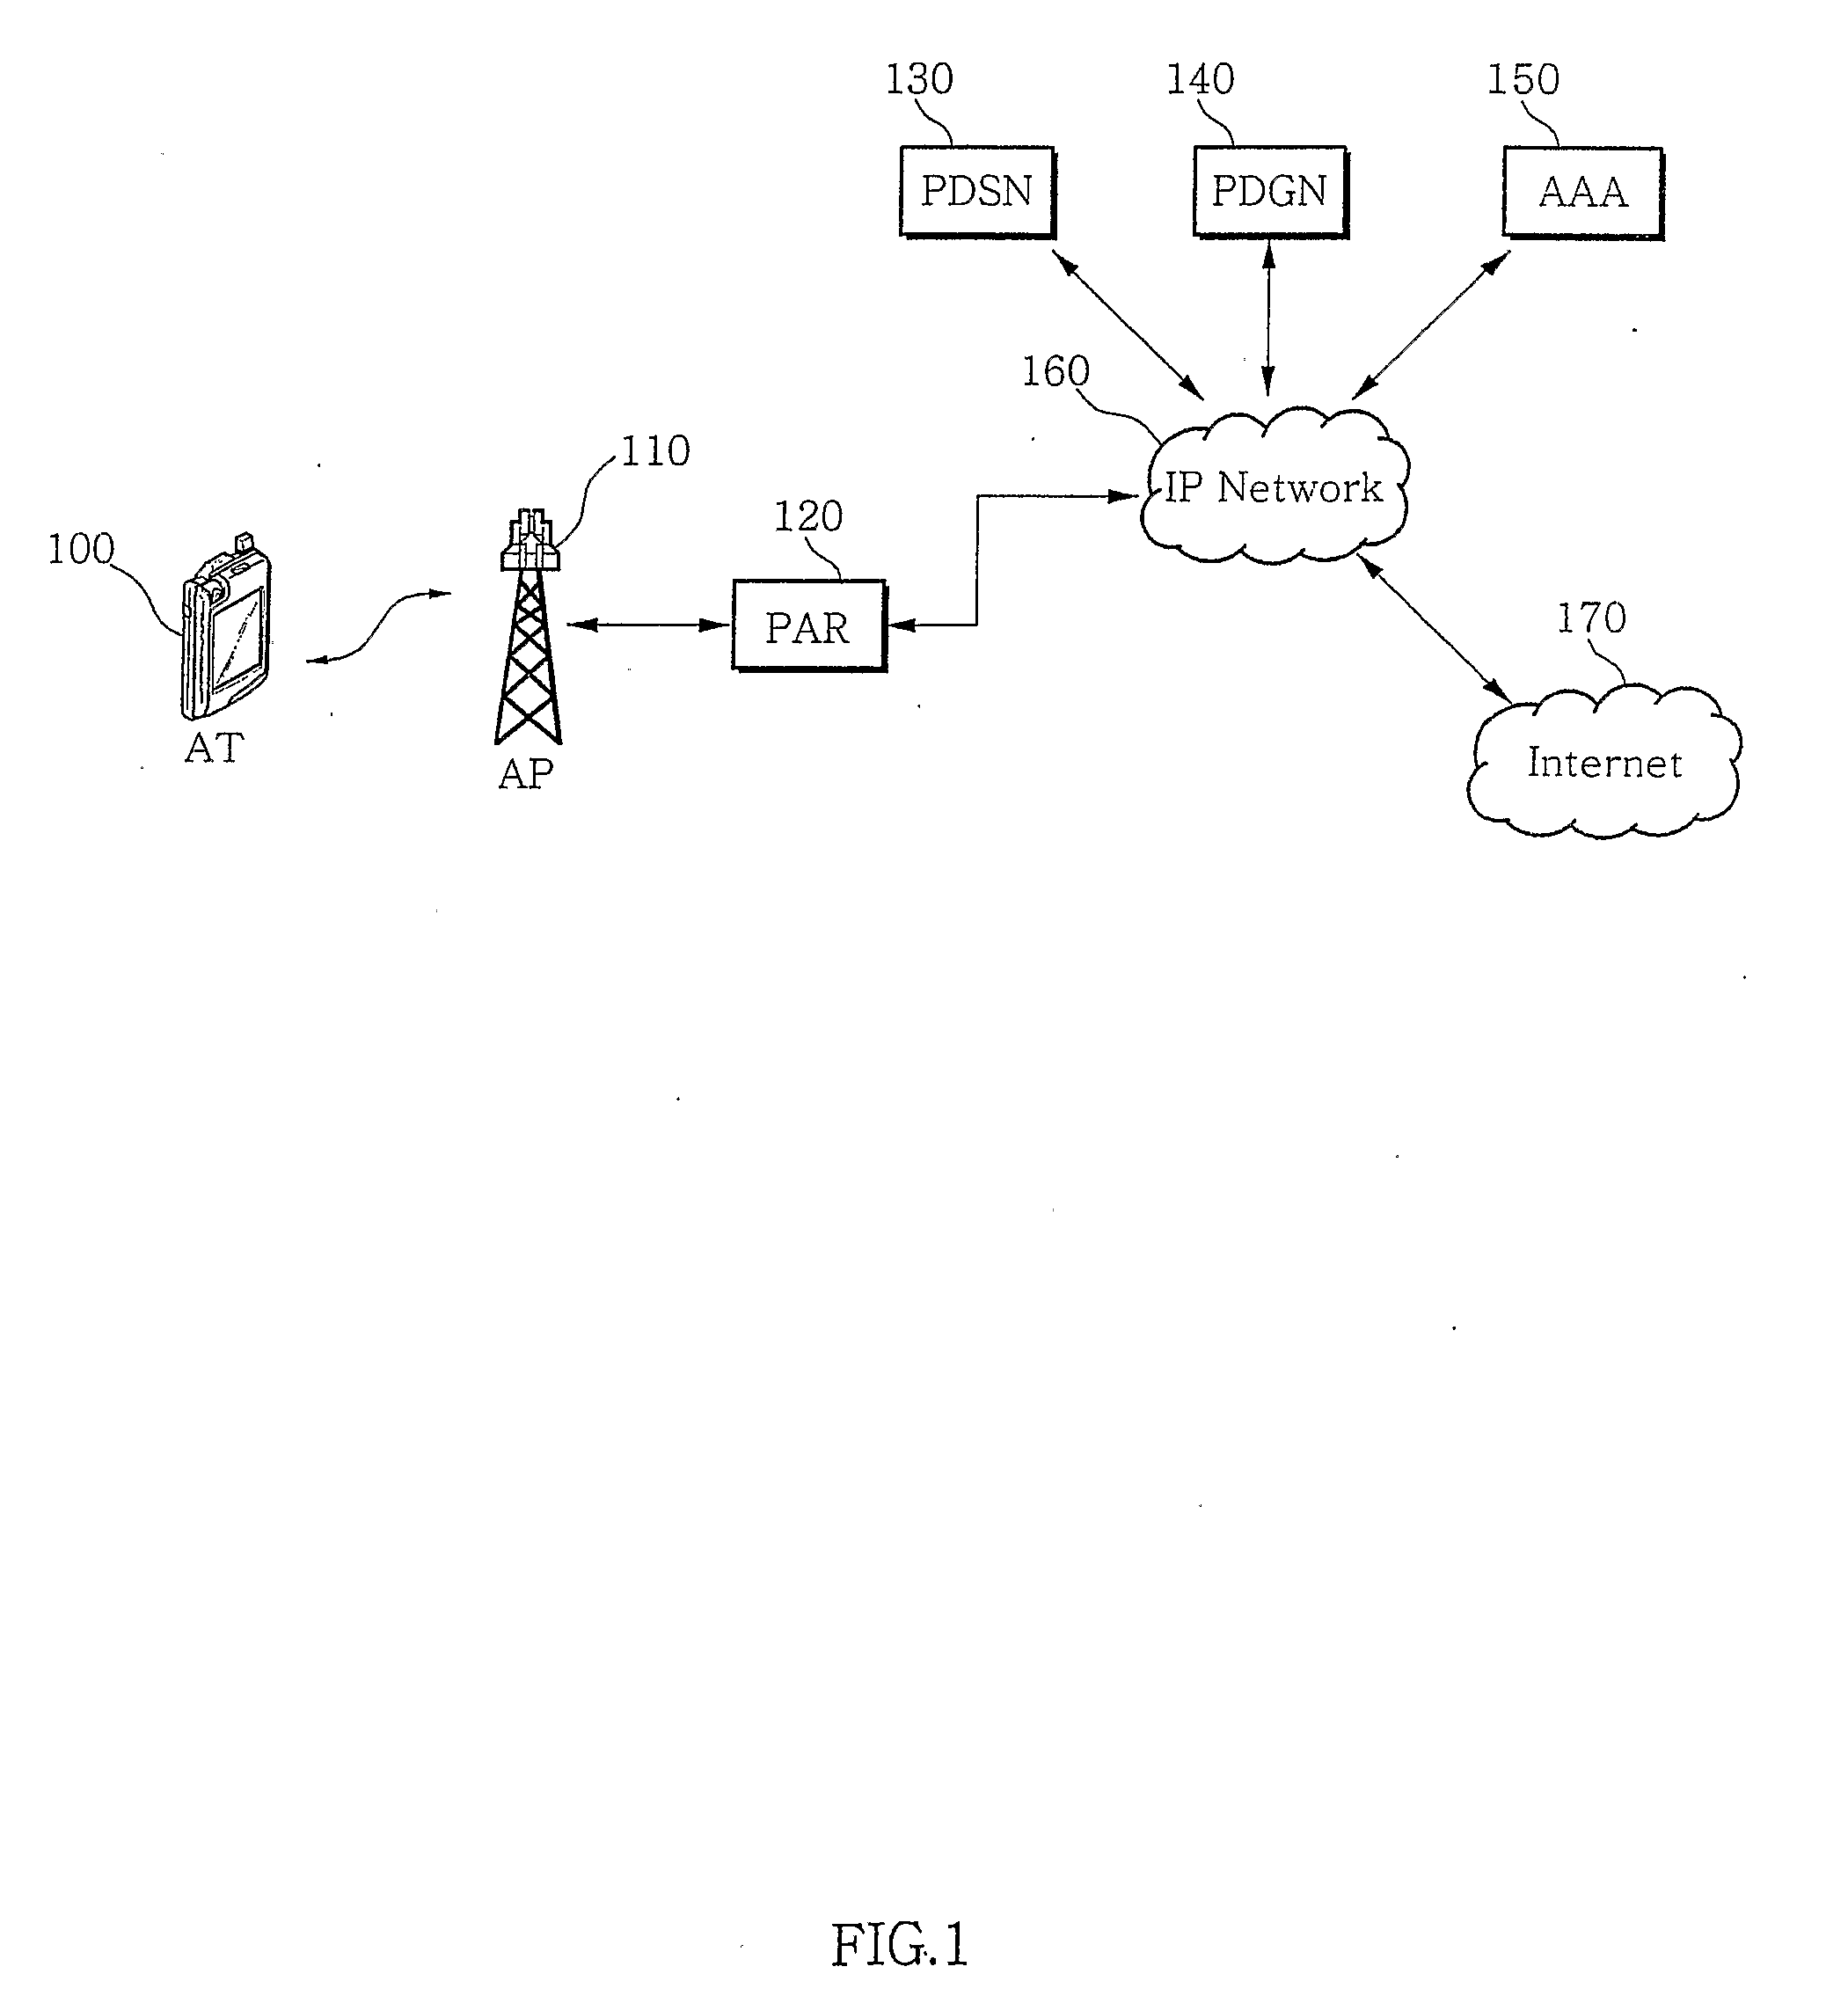 Method and System for Generating Switching Timing Signal for Separating Transmitting and Receiving Signal in Optical Repeater of Mobile Telecommunication Network Using Tdd and Ofdm Modulation